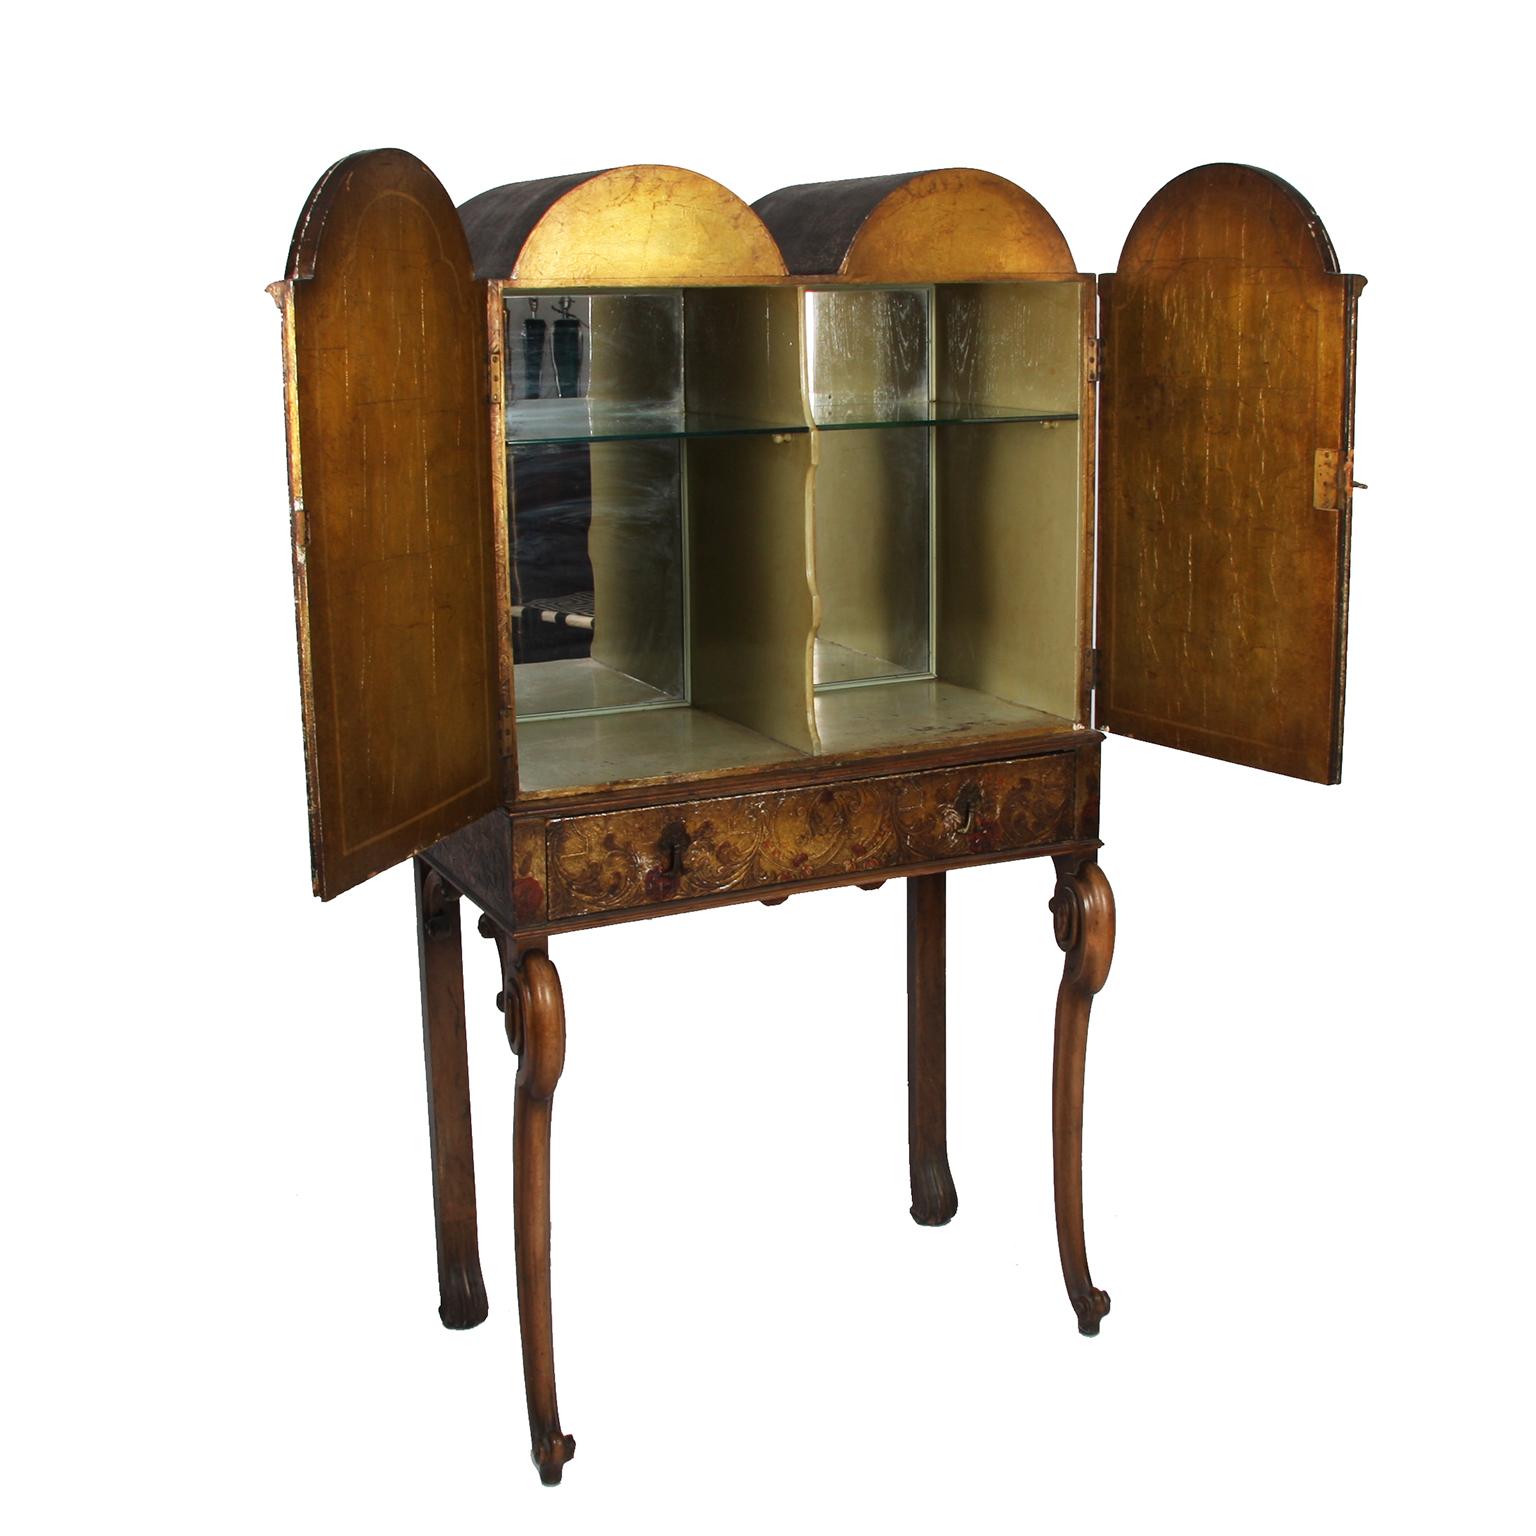 Giltwood 1920s Italian Gilt and Lacquer Drinks Cabinet with Mirrored Interior